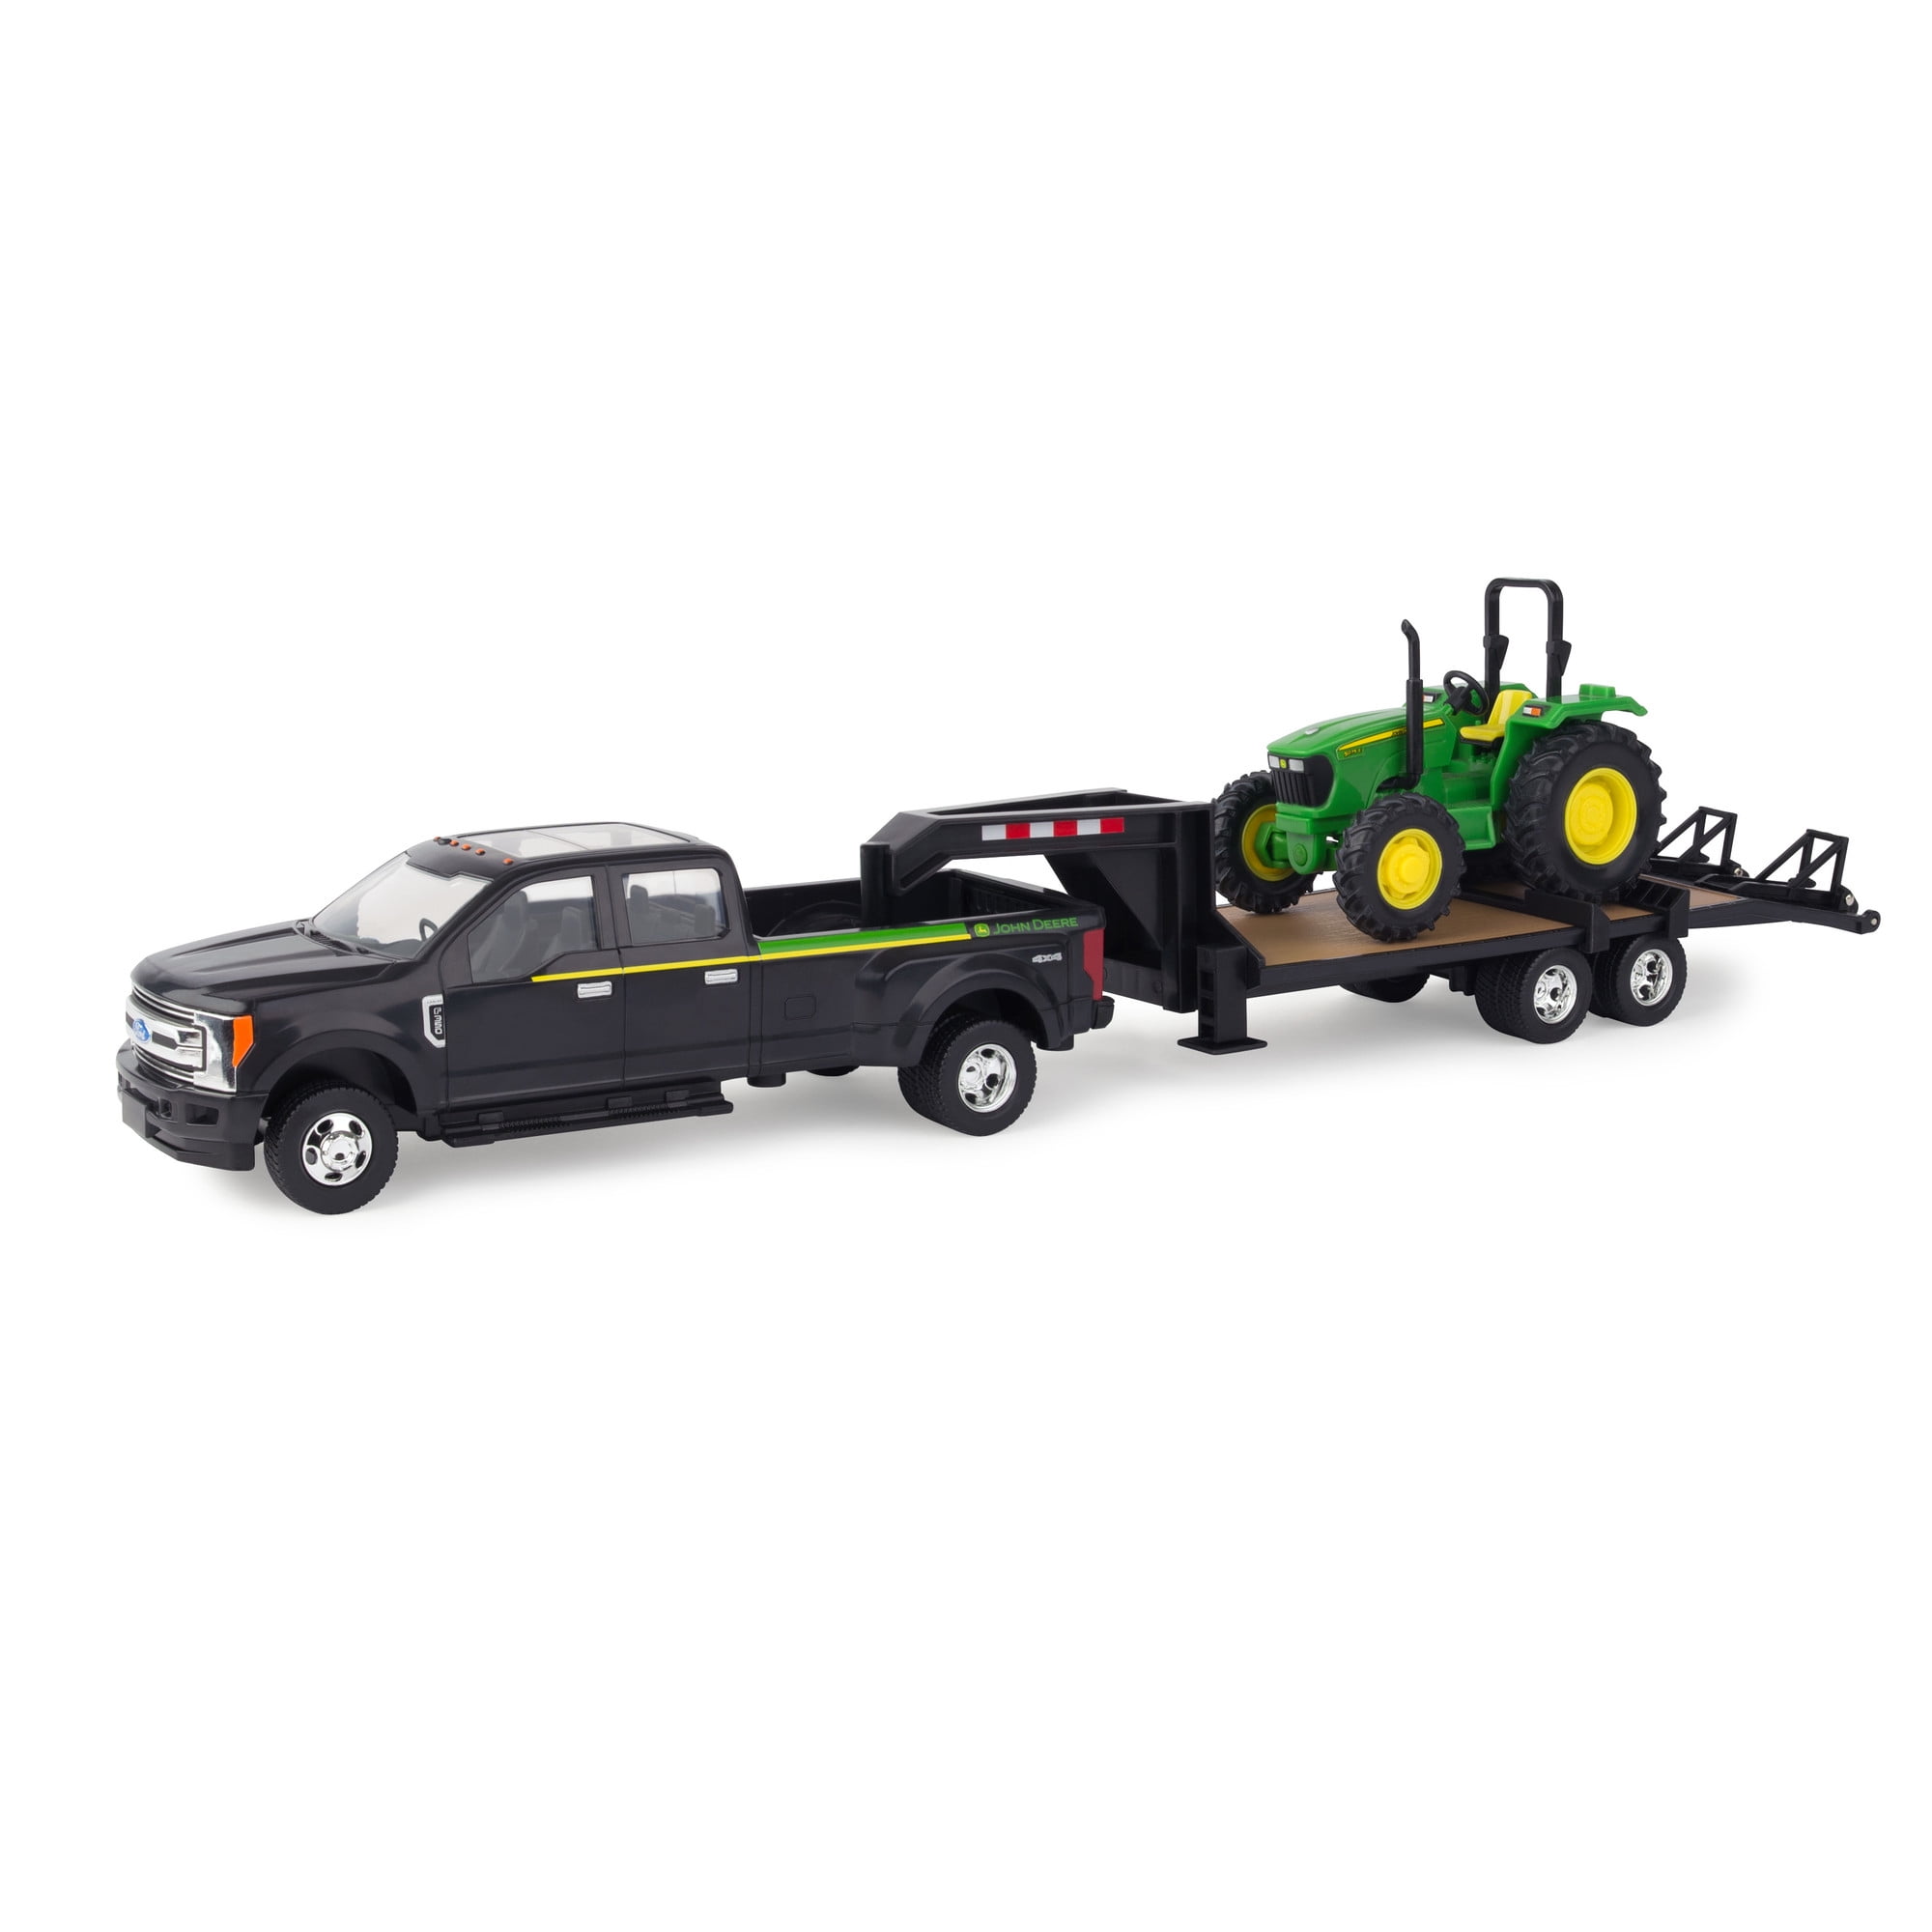 John Deere Toy Truck And Toy Tractor Set, 2017 Ford F350 & 5075E